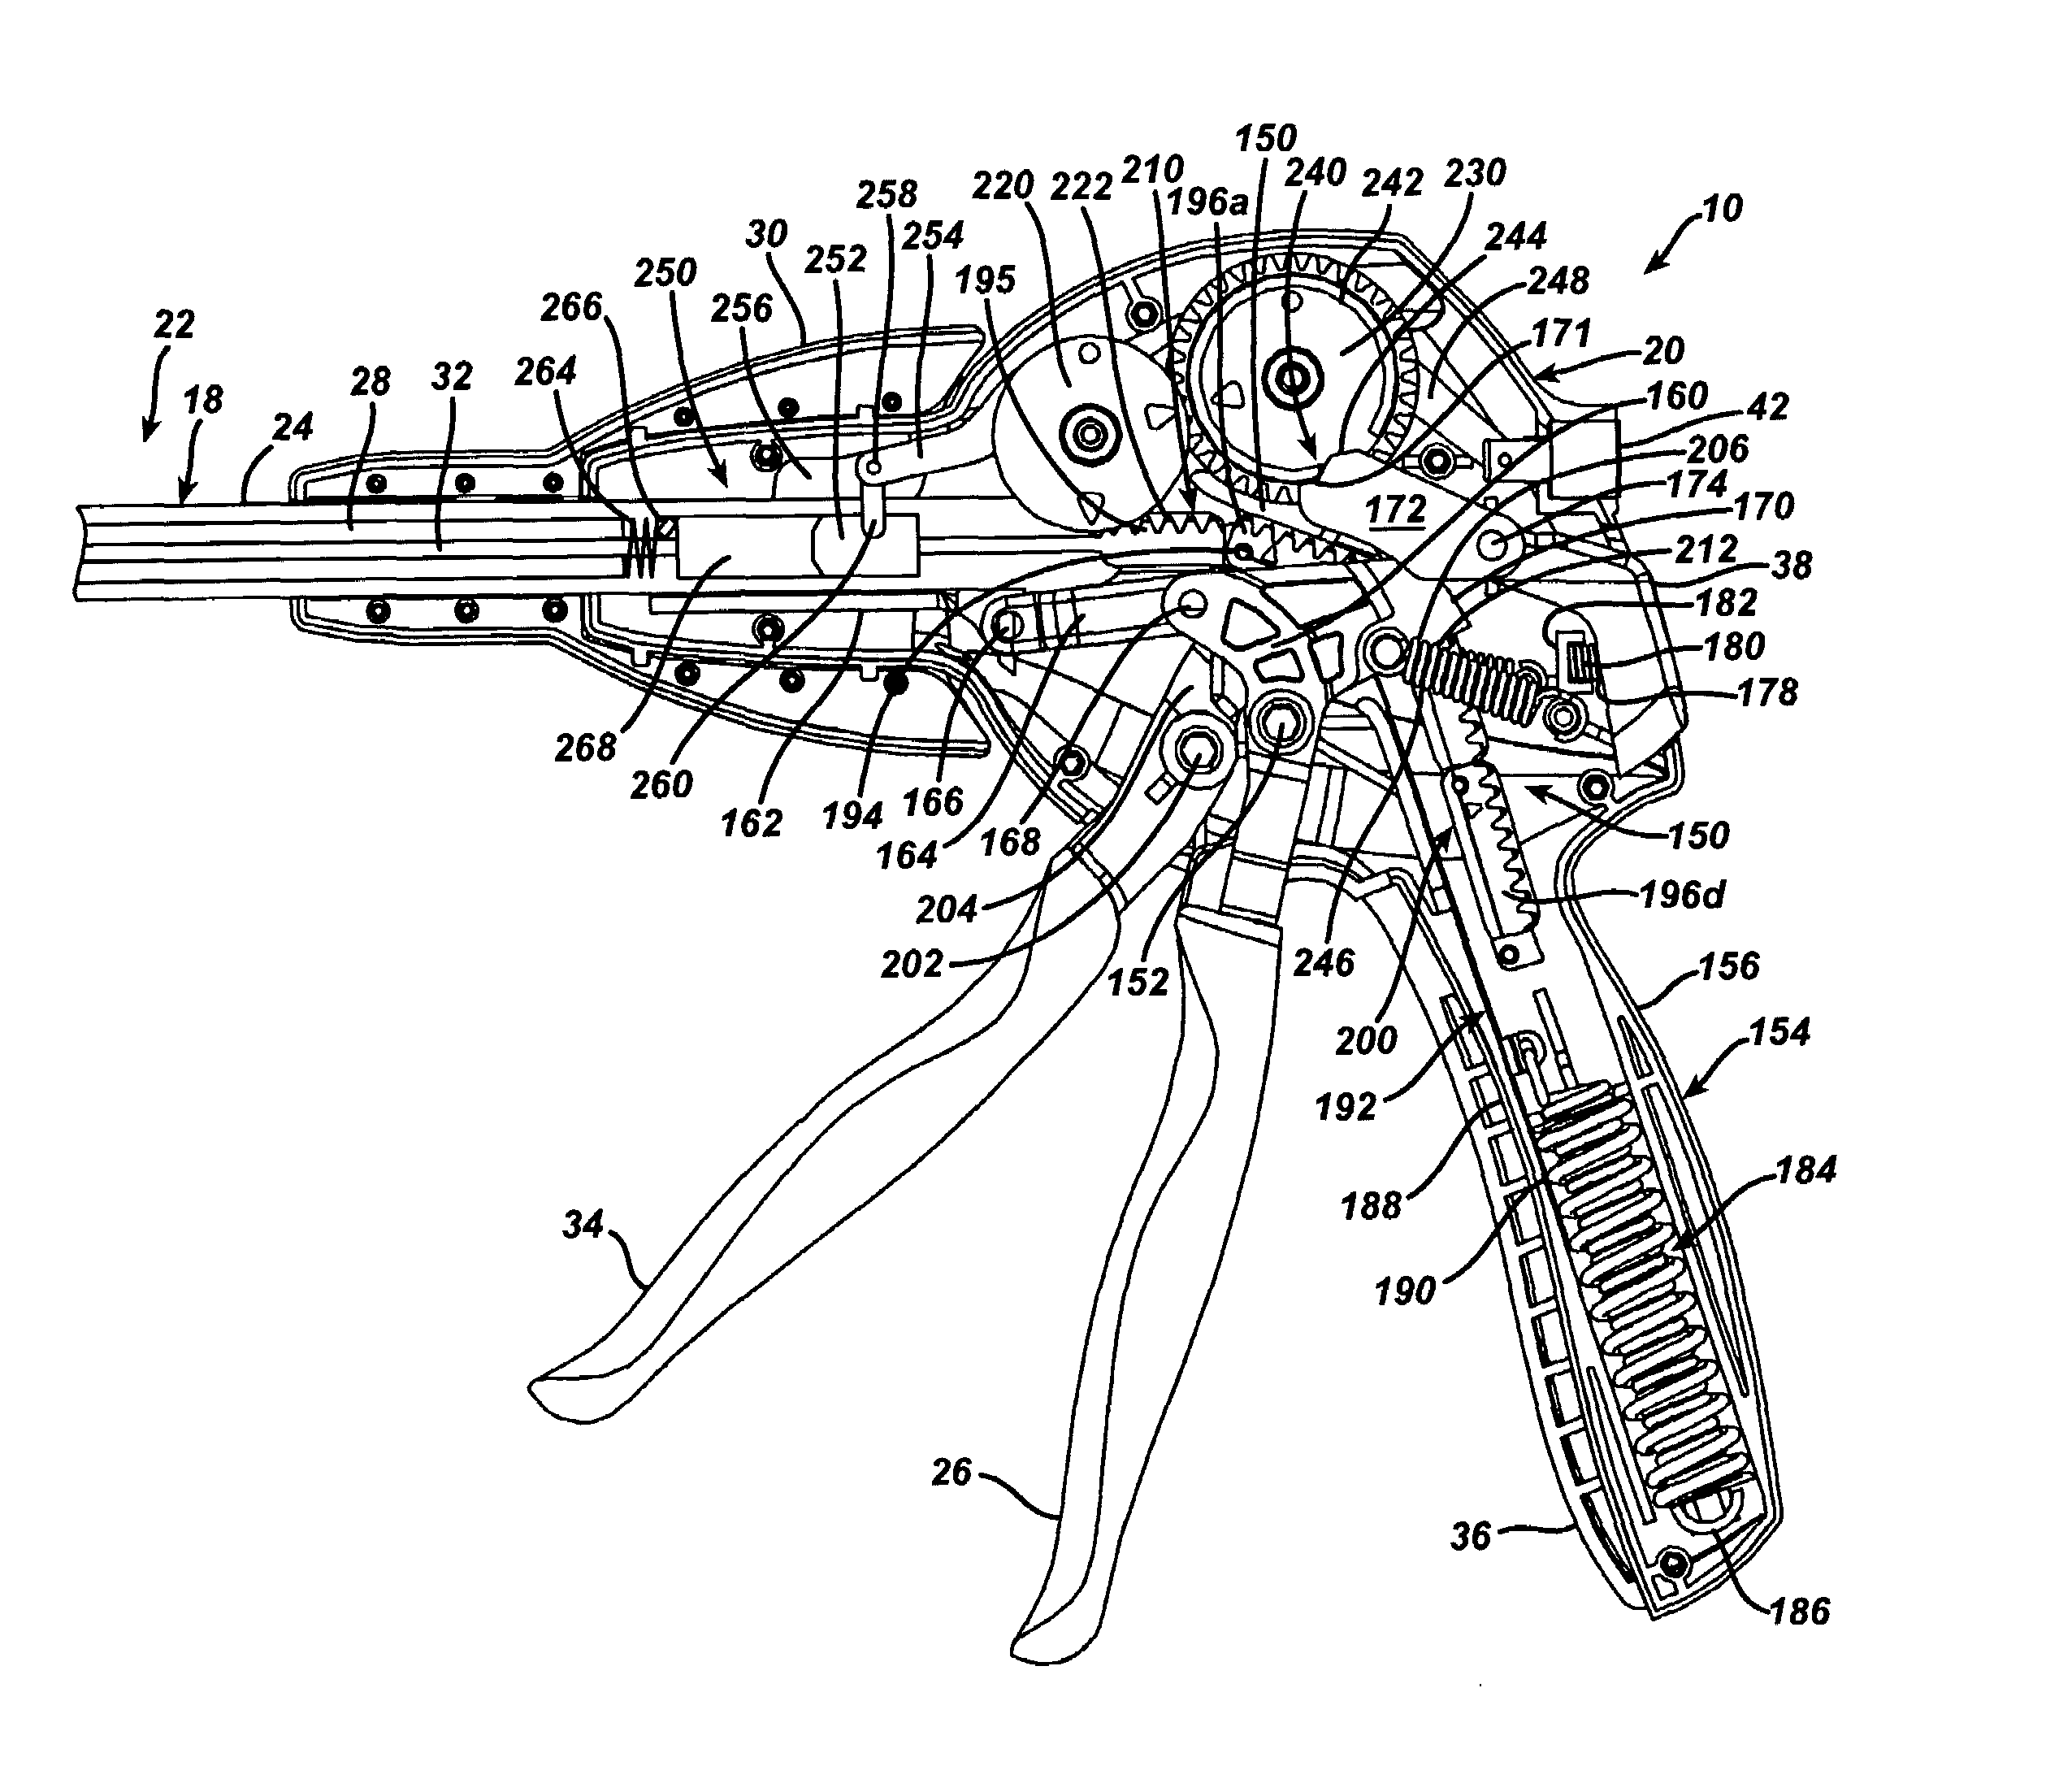 Multi-stroke mechanism with automatic end of stroke retraction